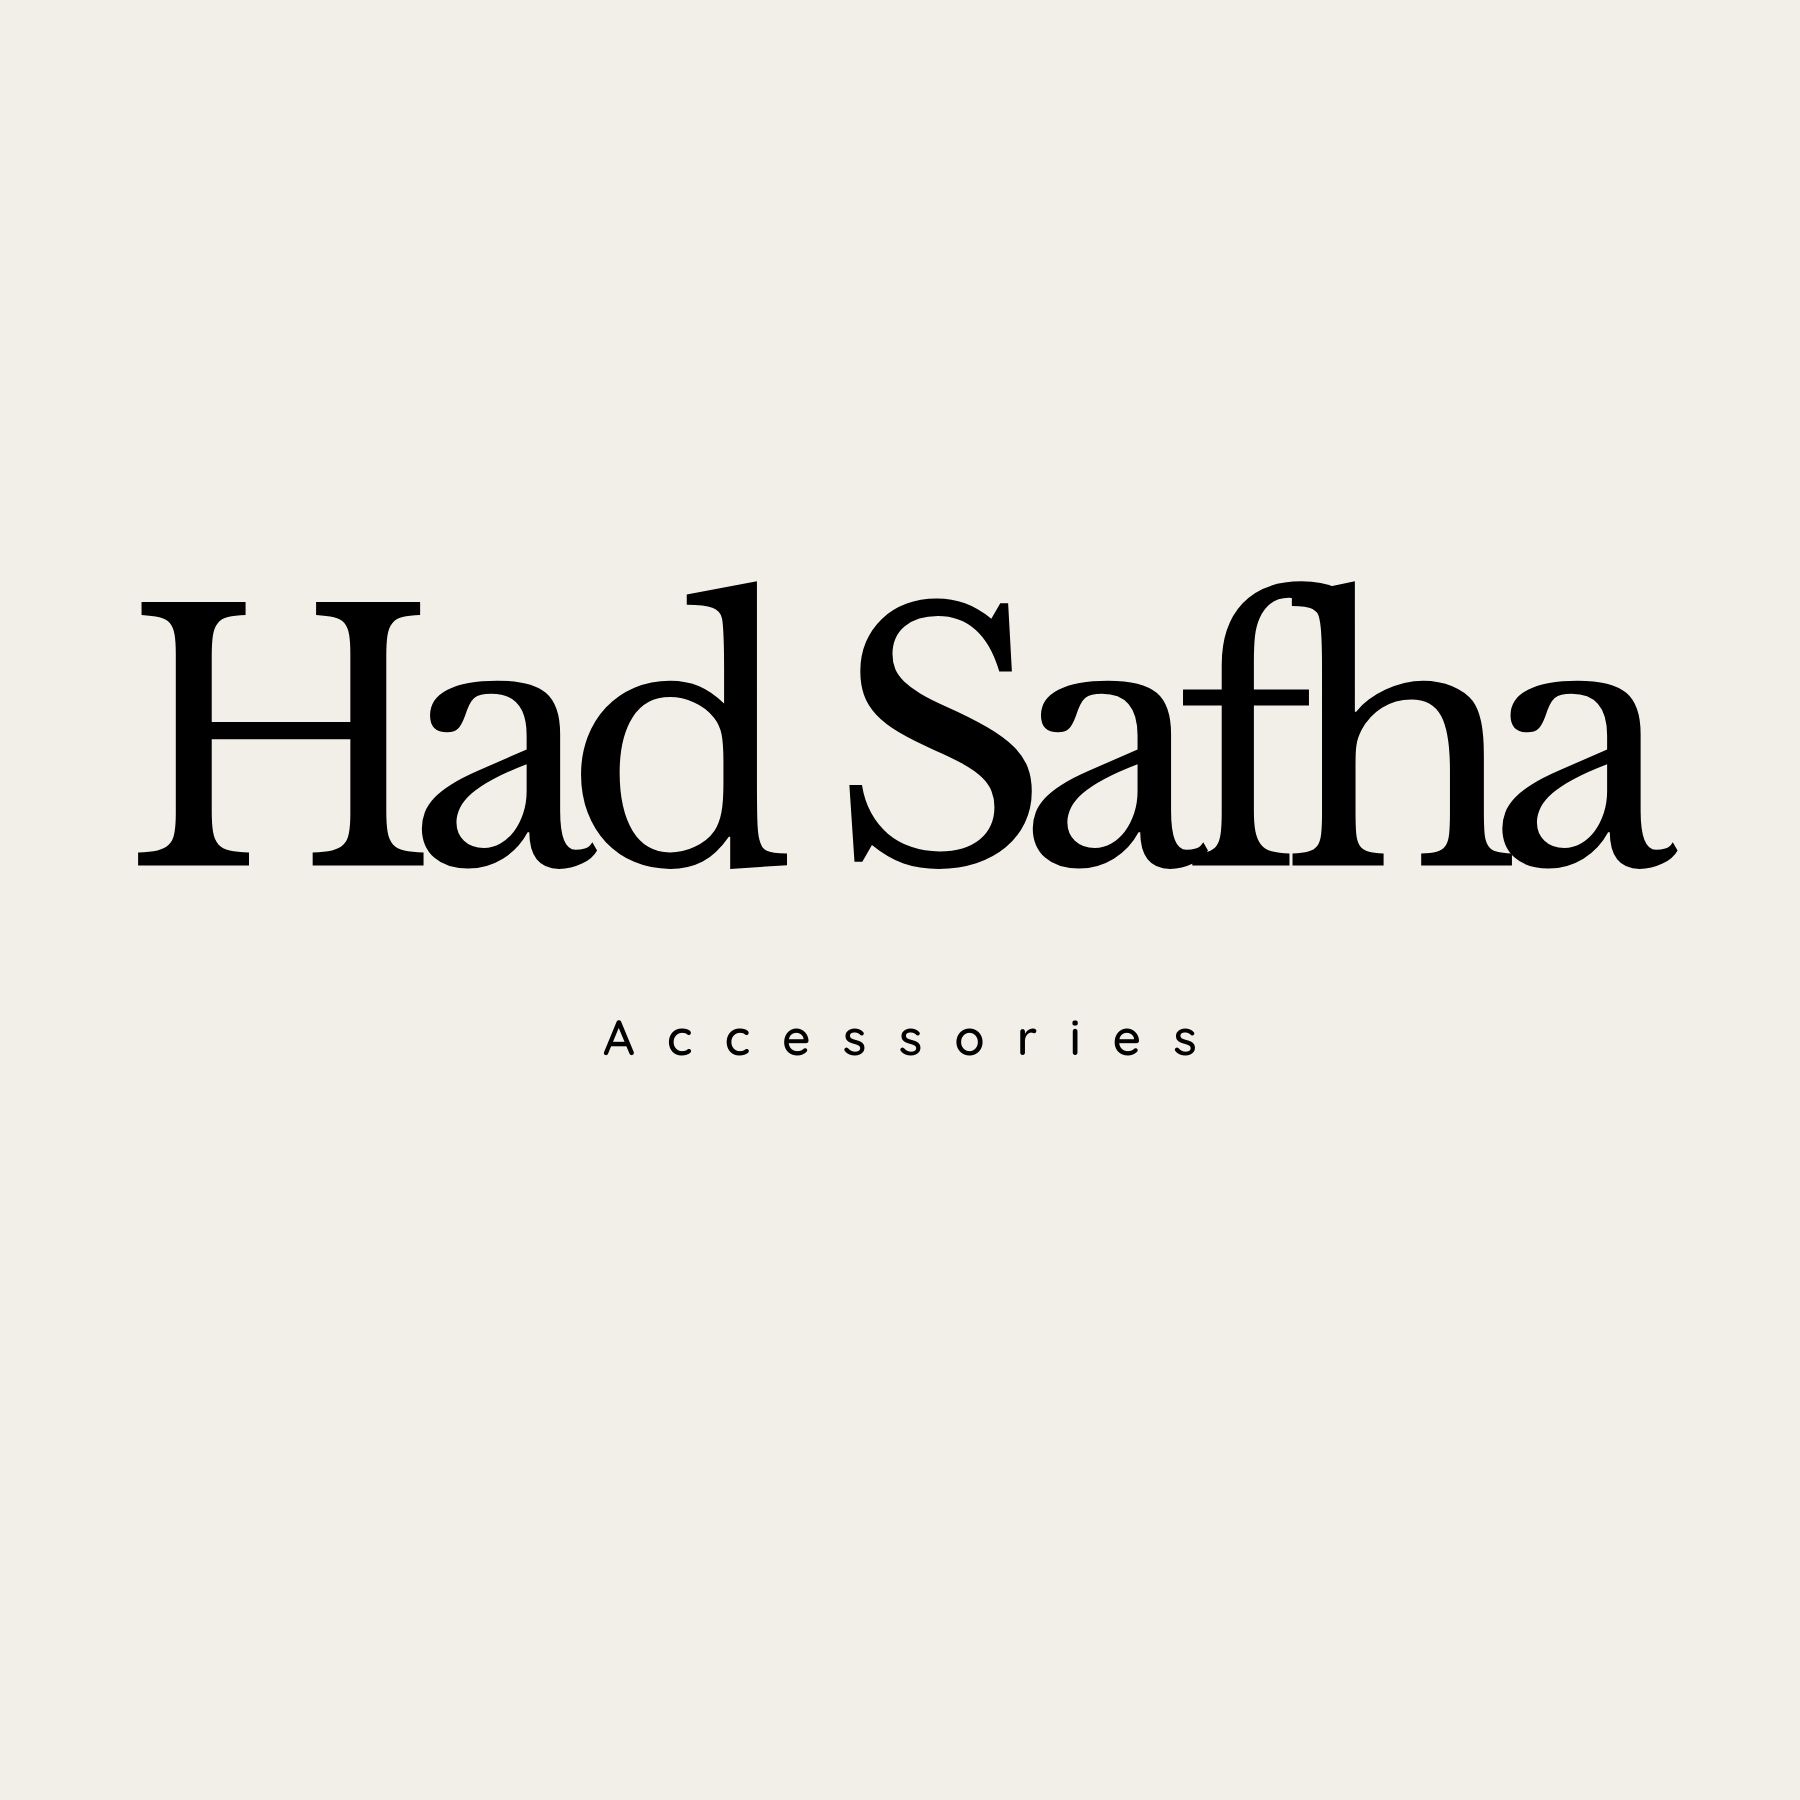 HadSafhaAccessories